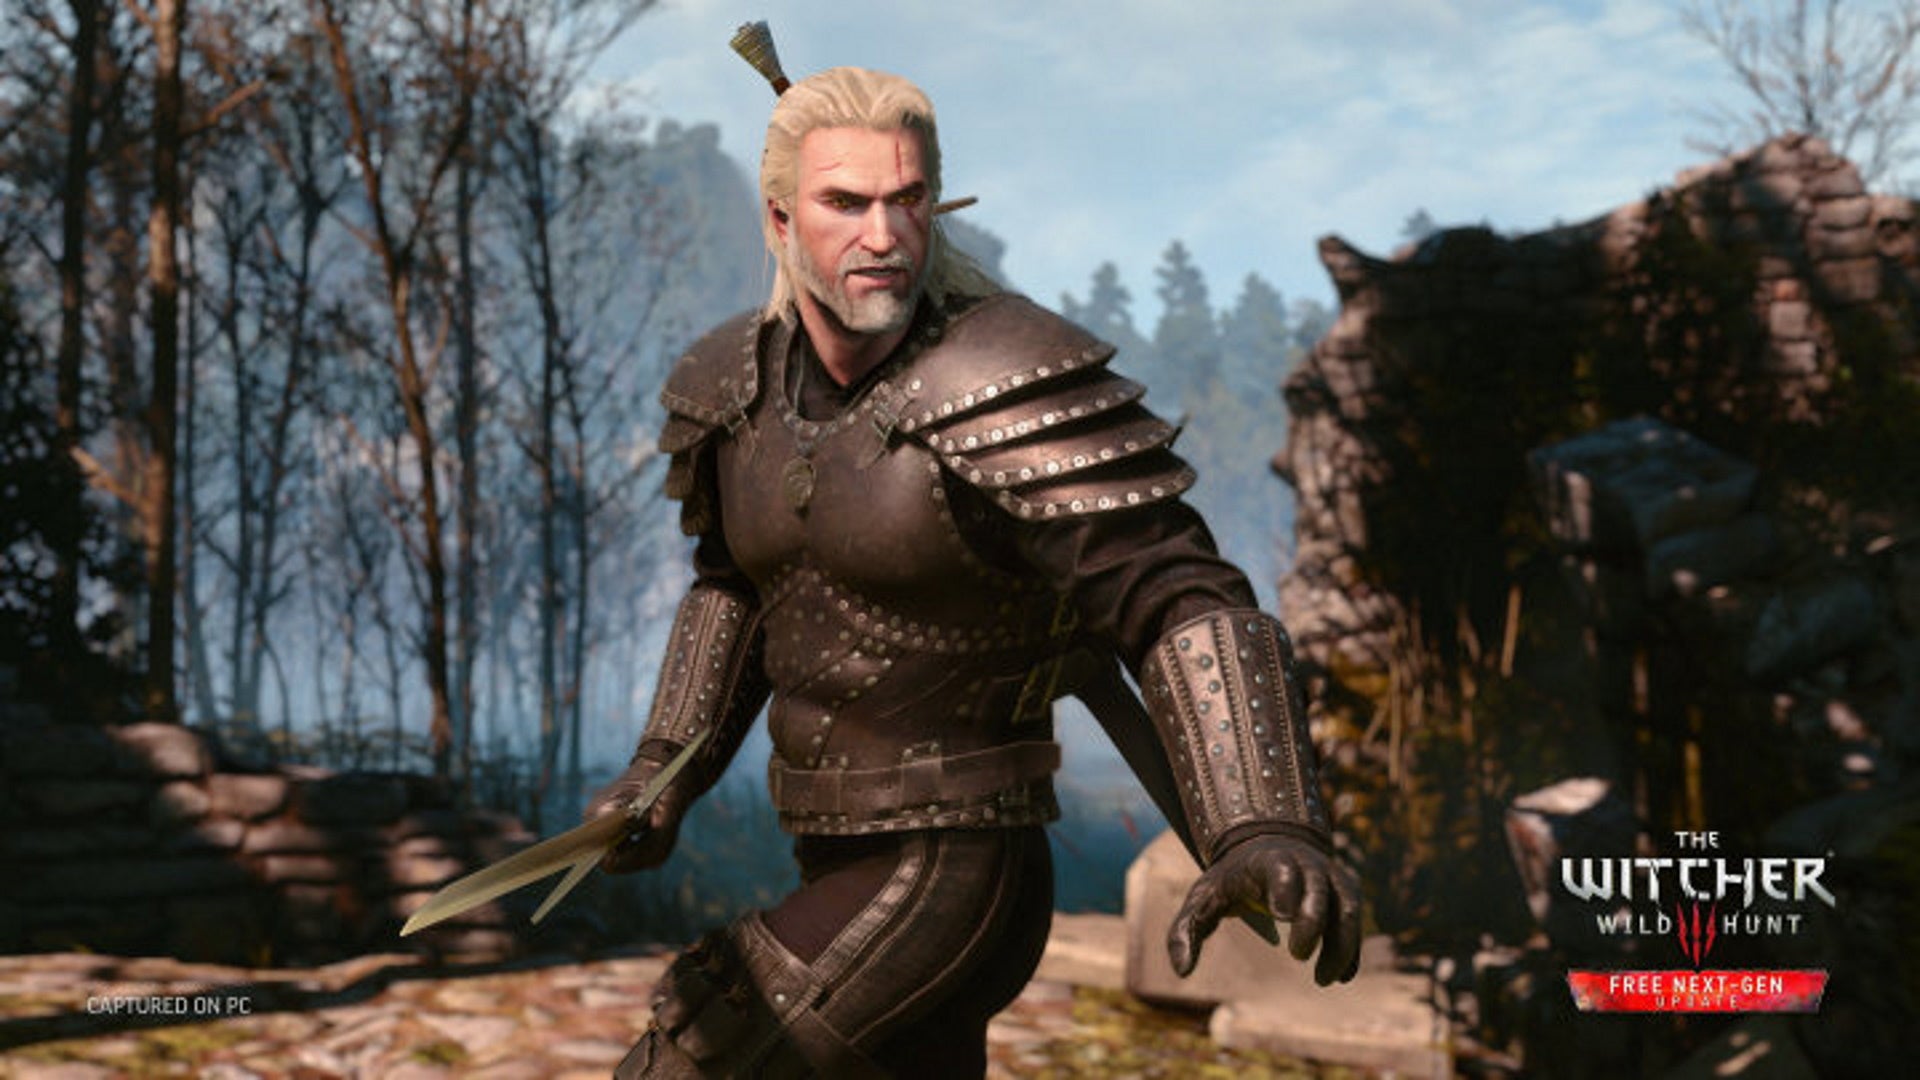 The Witcher 3 The Best Weapons and Armor Guide | VG247